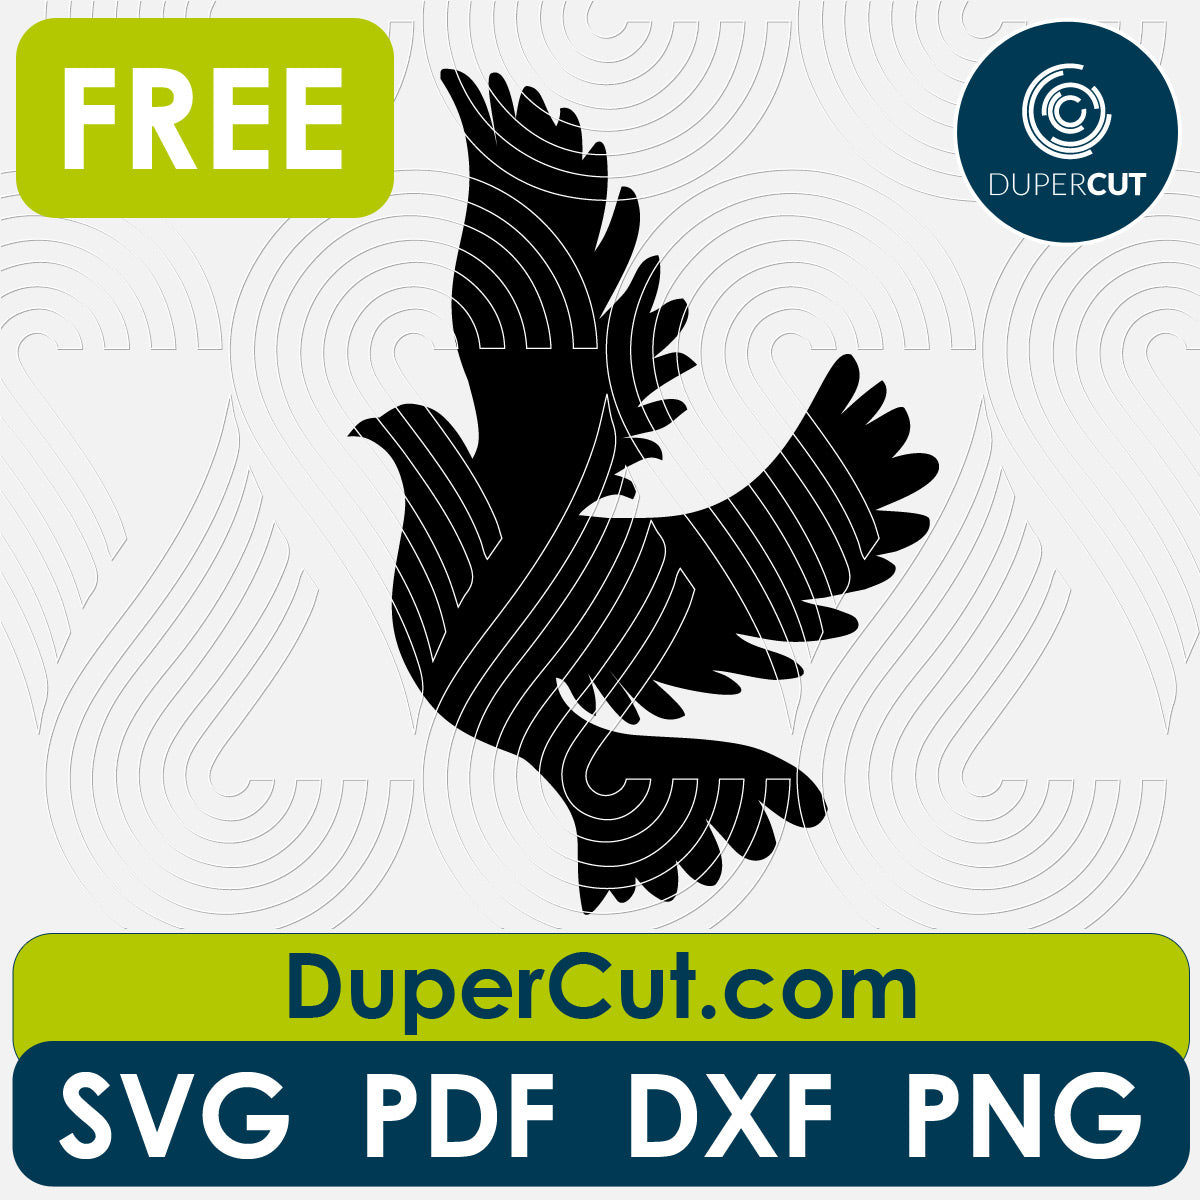 Dove silhouette, FREE cutting template SVG PNG DXF files for Glowforge, Cricut, Silhouette, CNC laser router by DuperCut.com